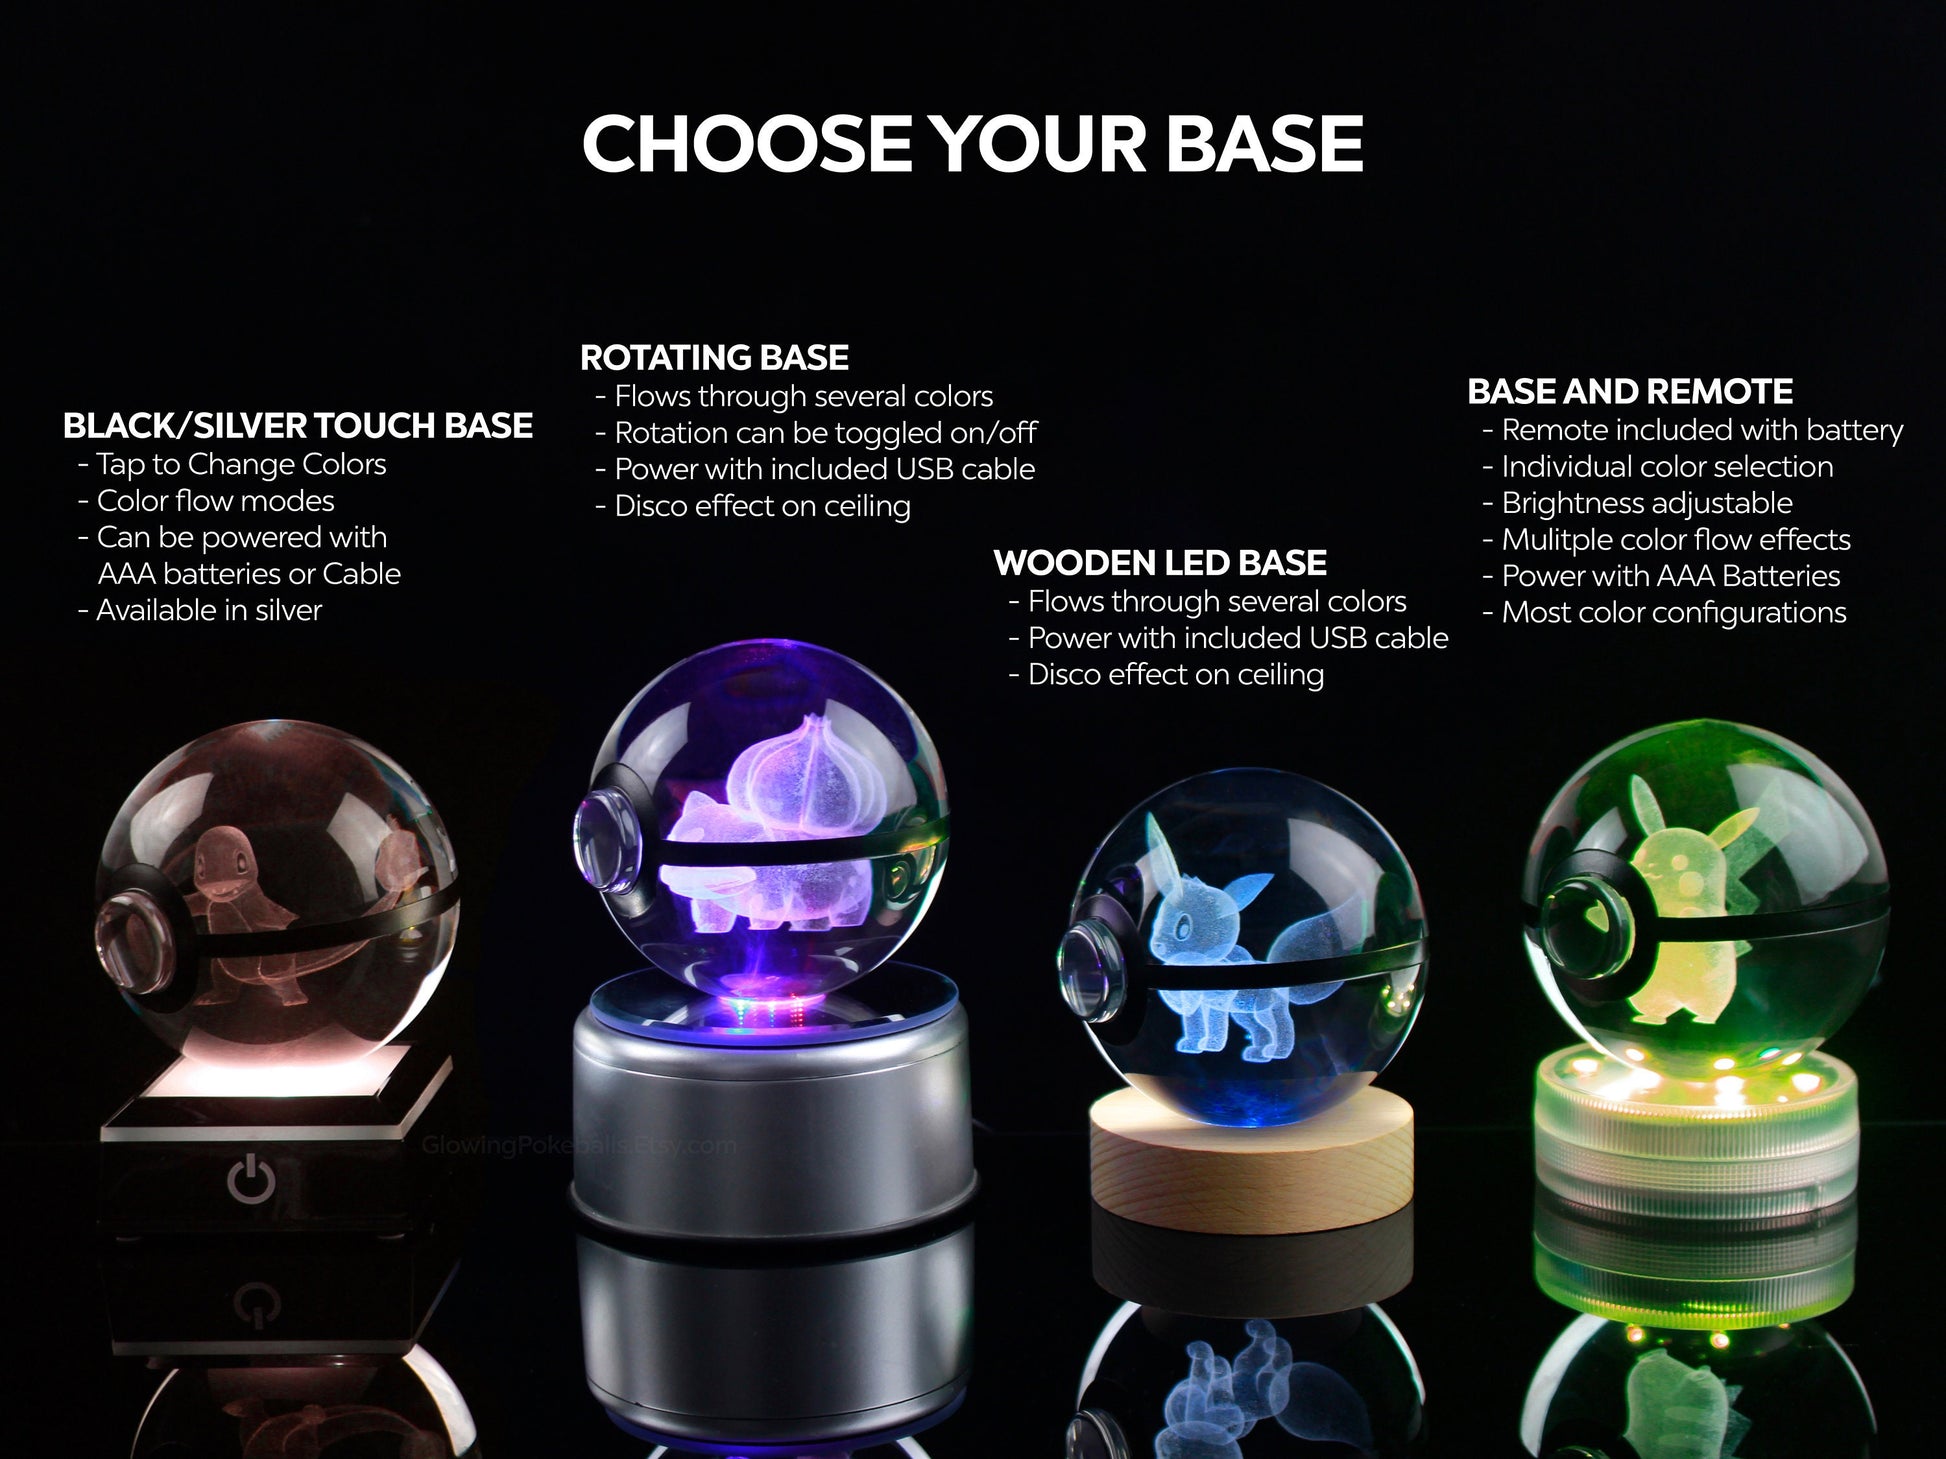 LED bases and their descriptions